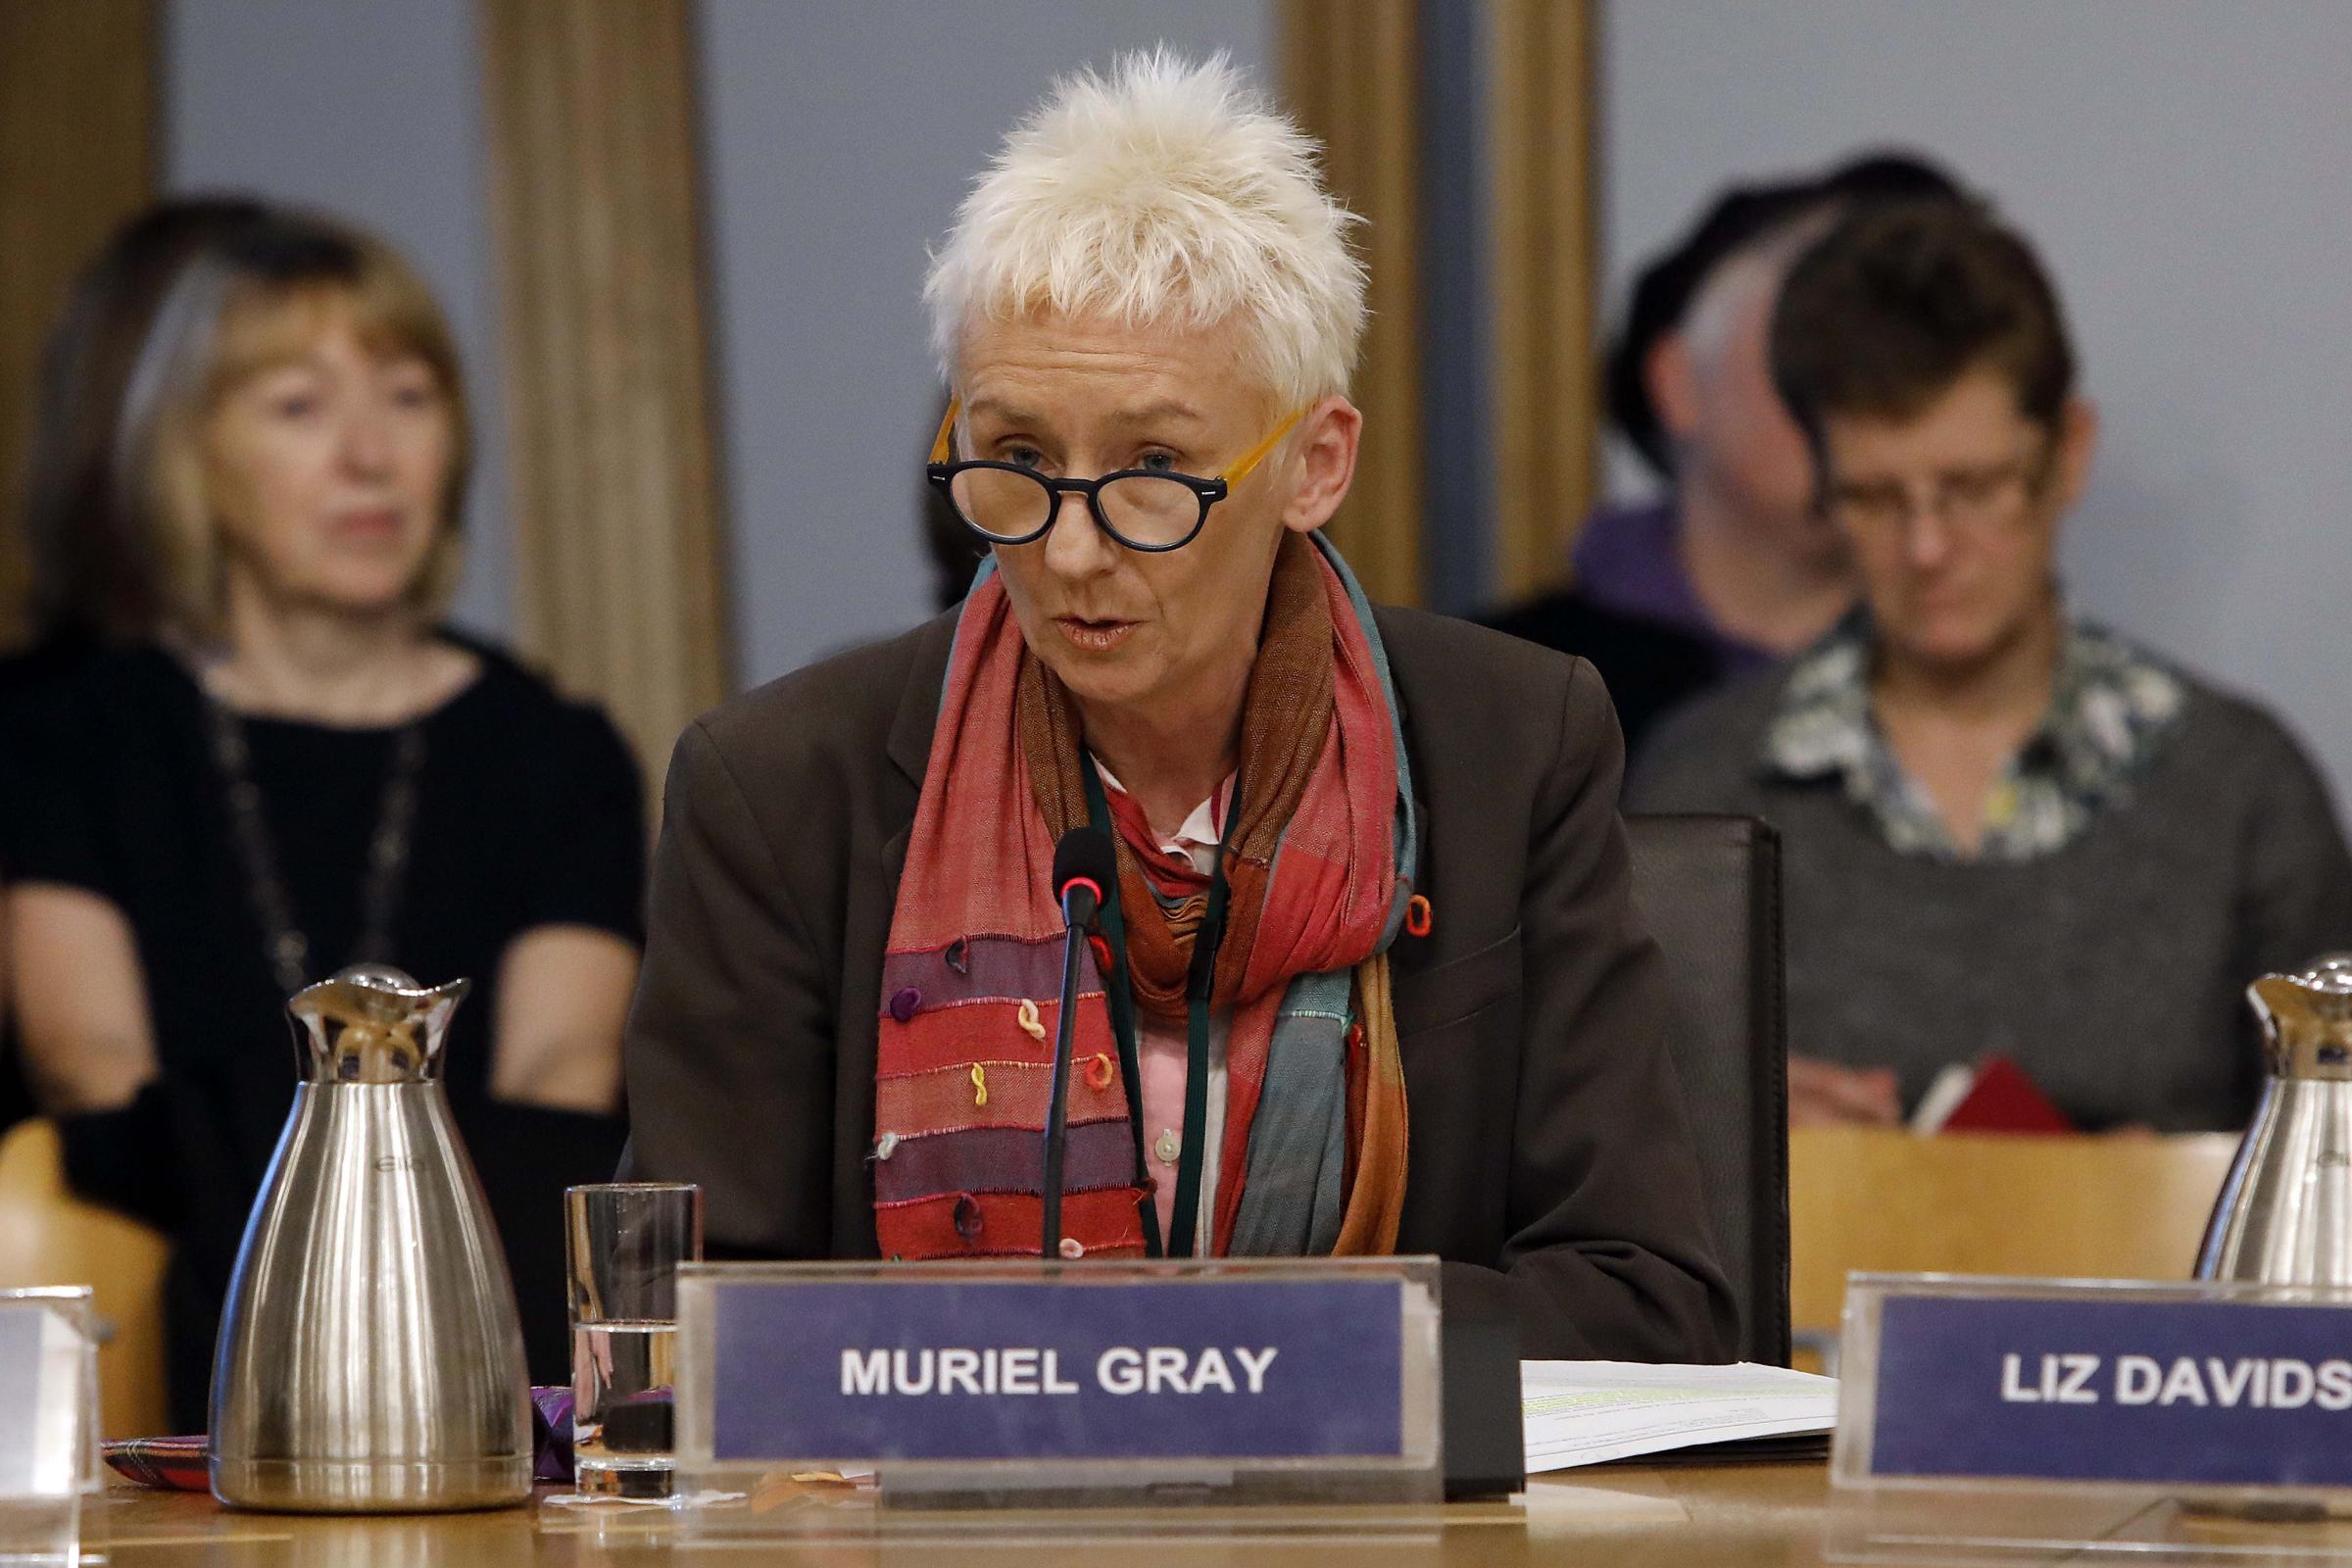 Muriel Gray appearing before Holyroods culture committee in November 2018 to give evidence to the Glasgow School of Art inquiry. She stood down as chairman last year.